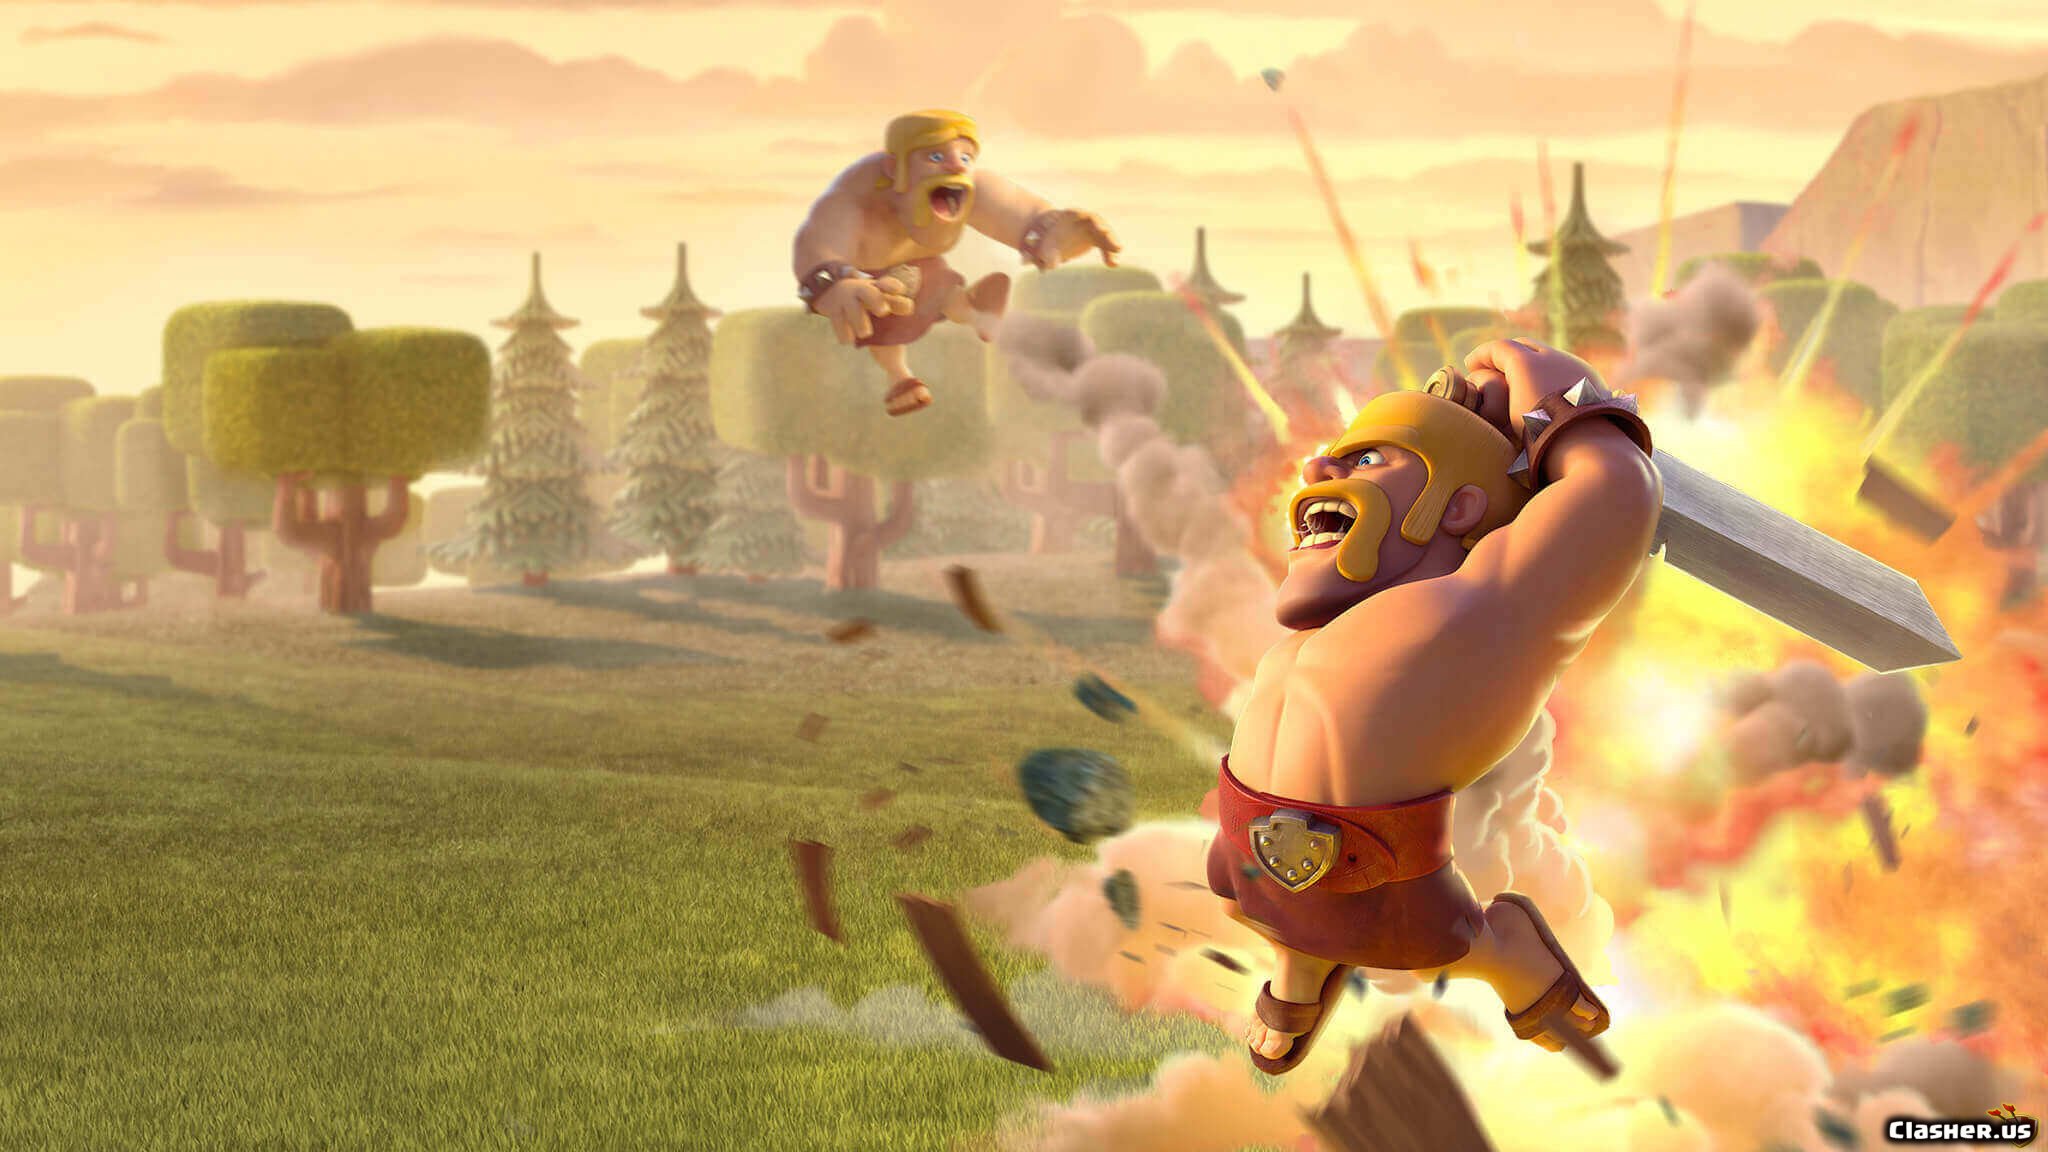 Barbarian bump! - Clash of Clans Wallpapers 